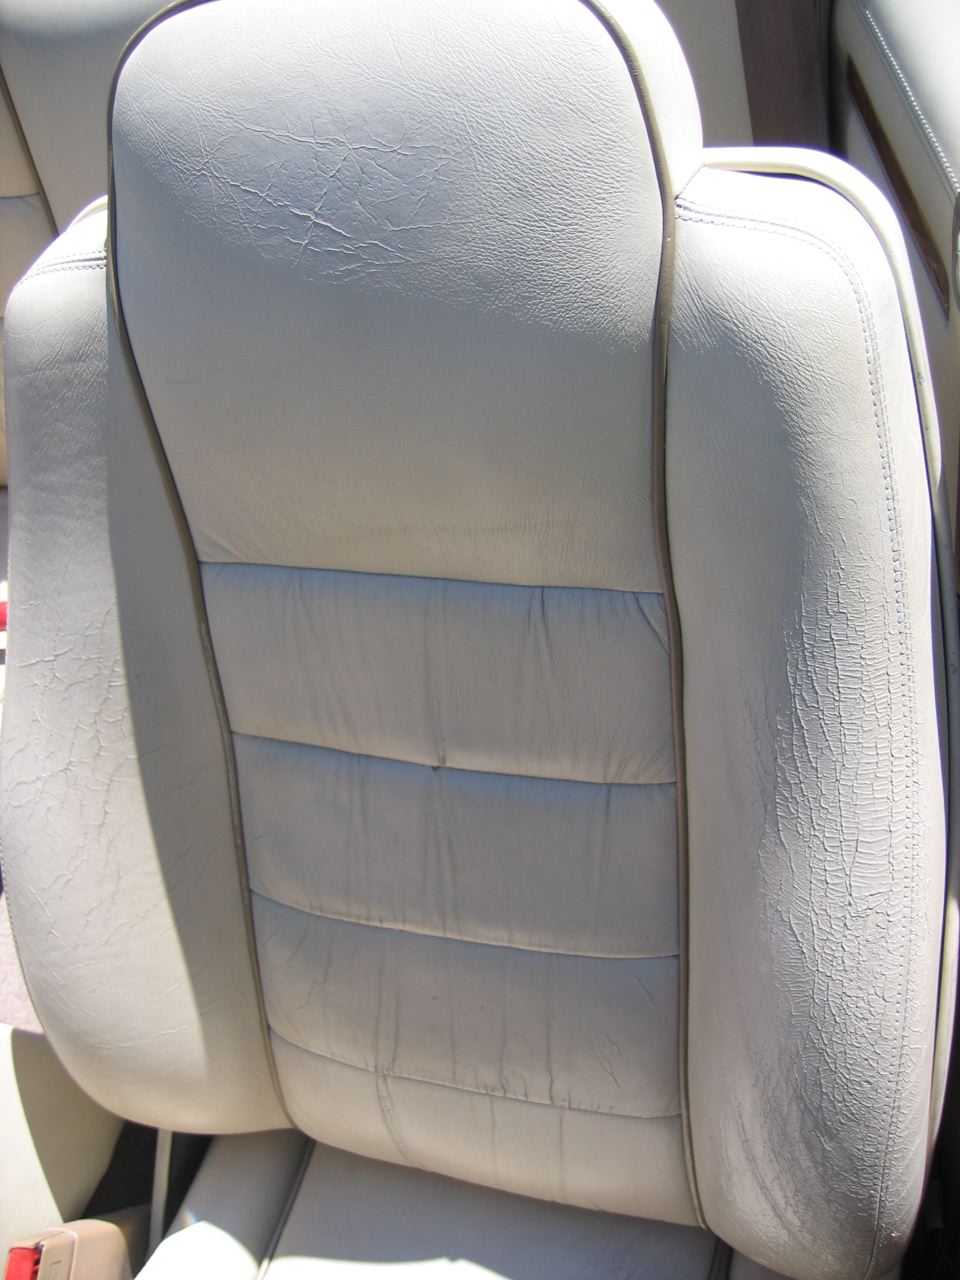 XJS Seats to Restore or Reupholster ?